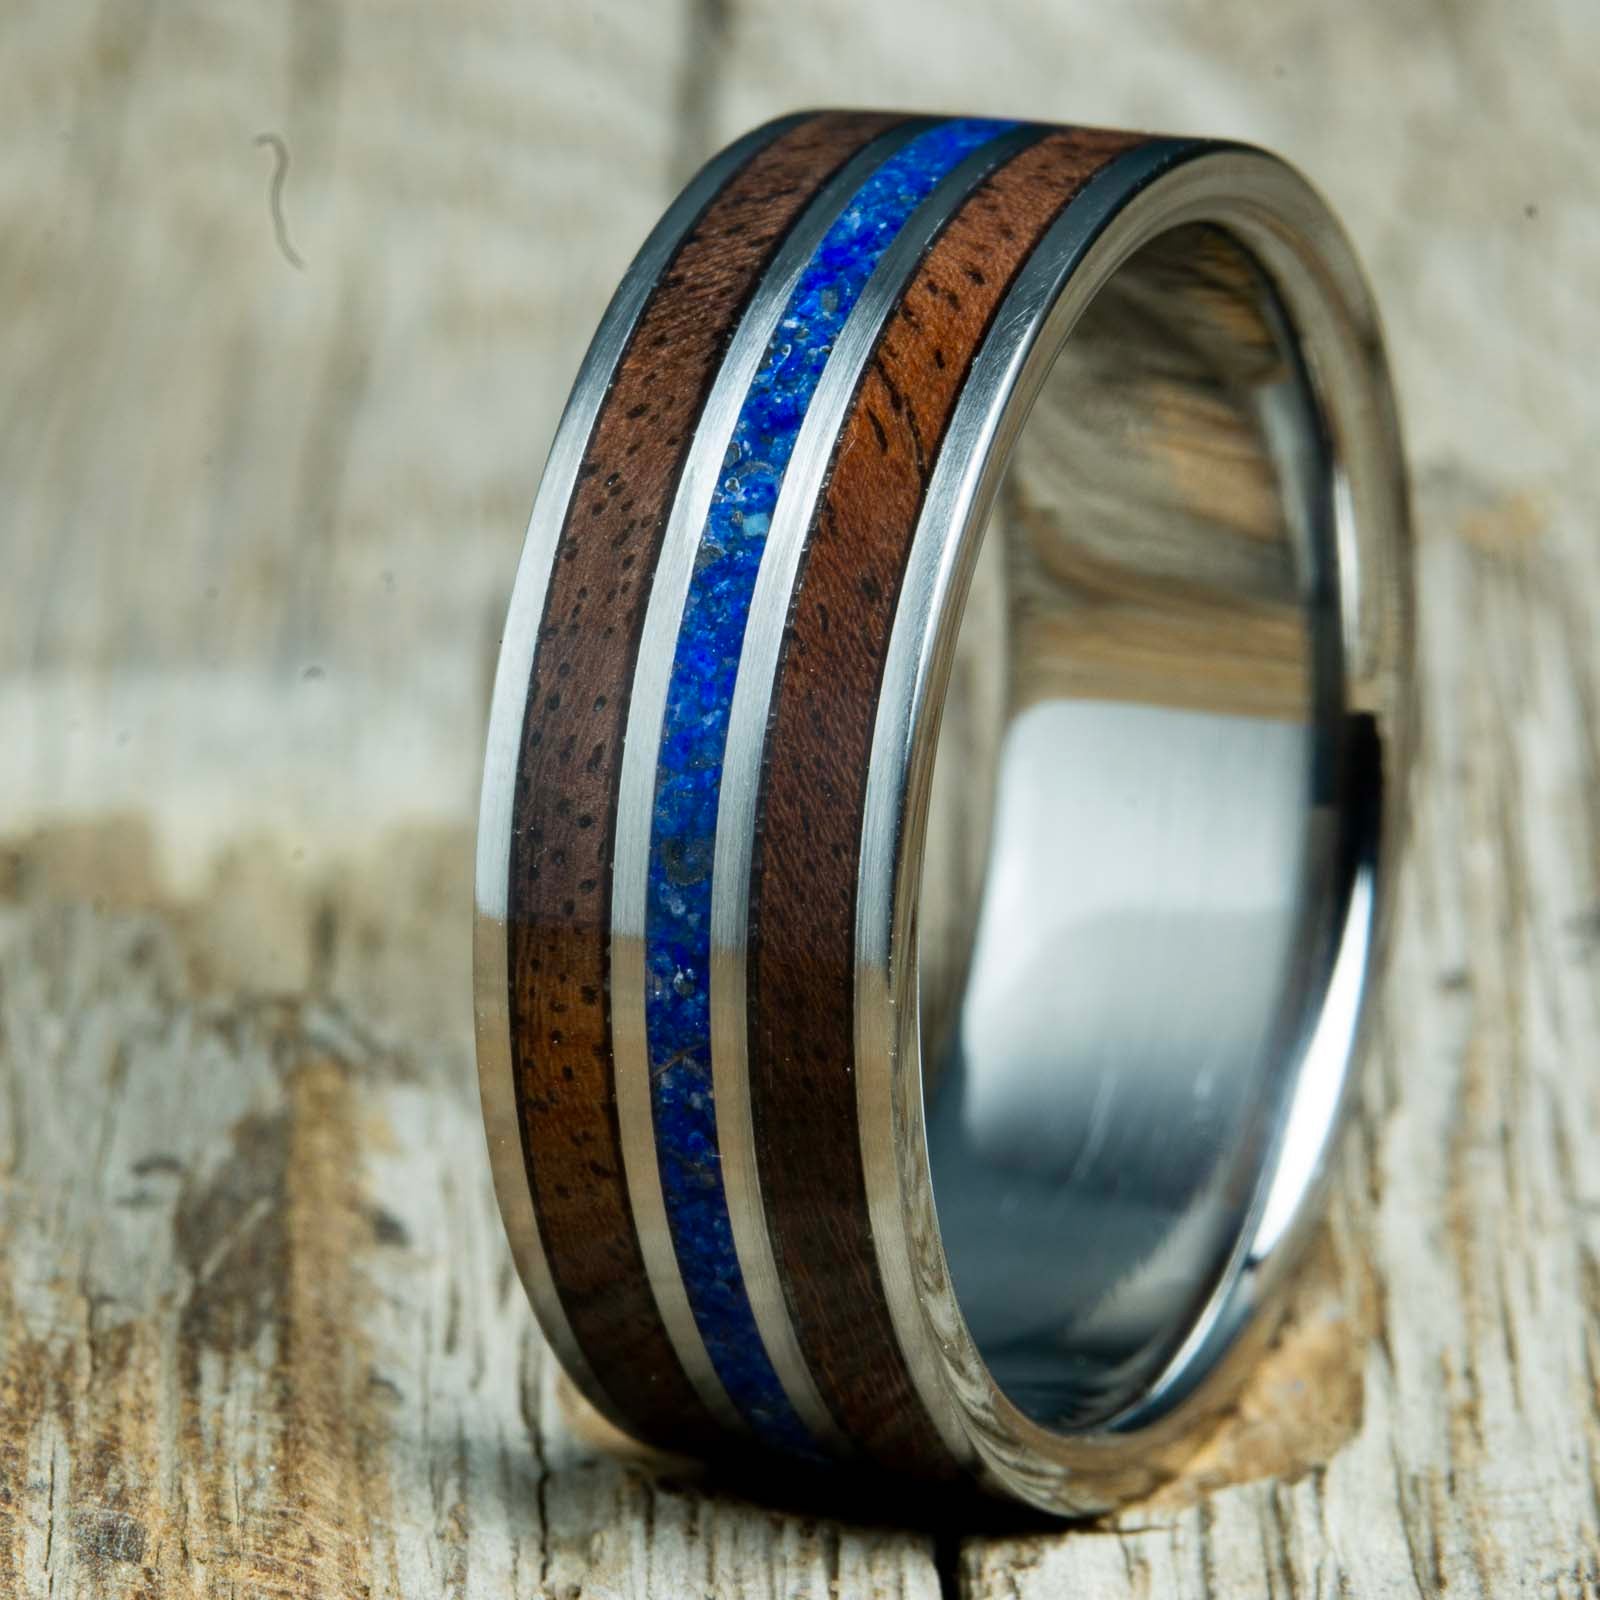 walnut wooden ring with Lapis stone inlay on polished titanium band made by Peacefield Titanium